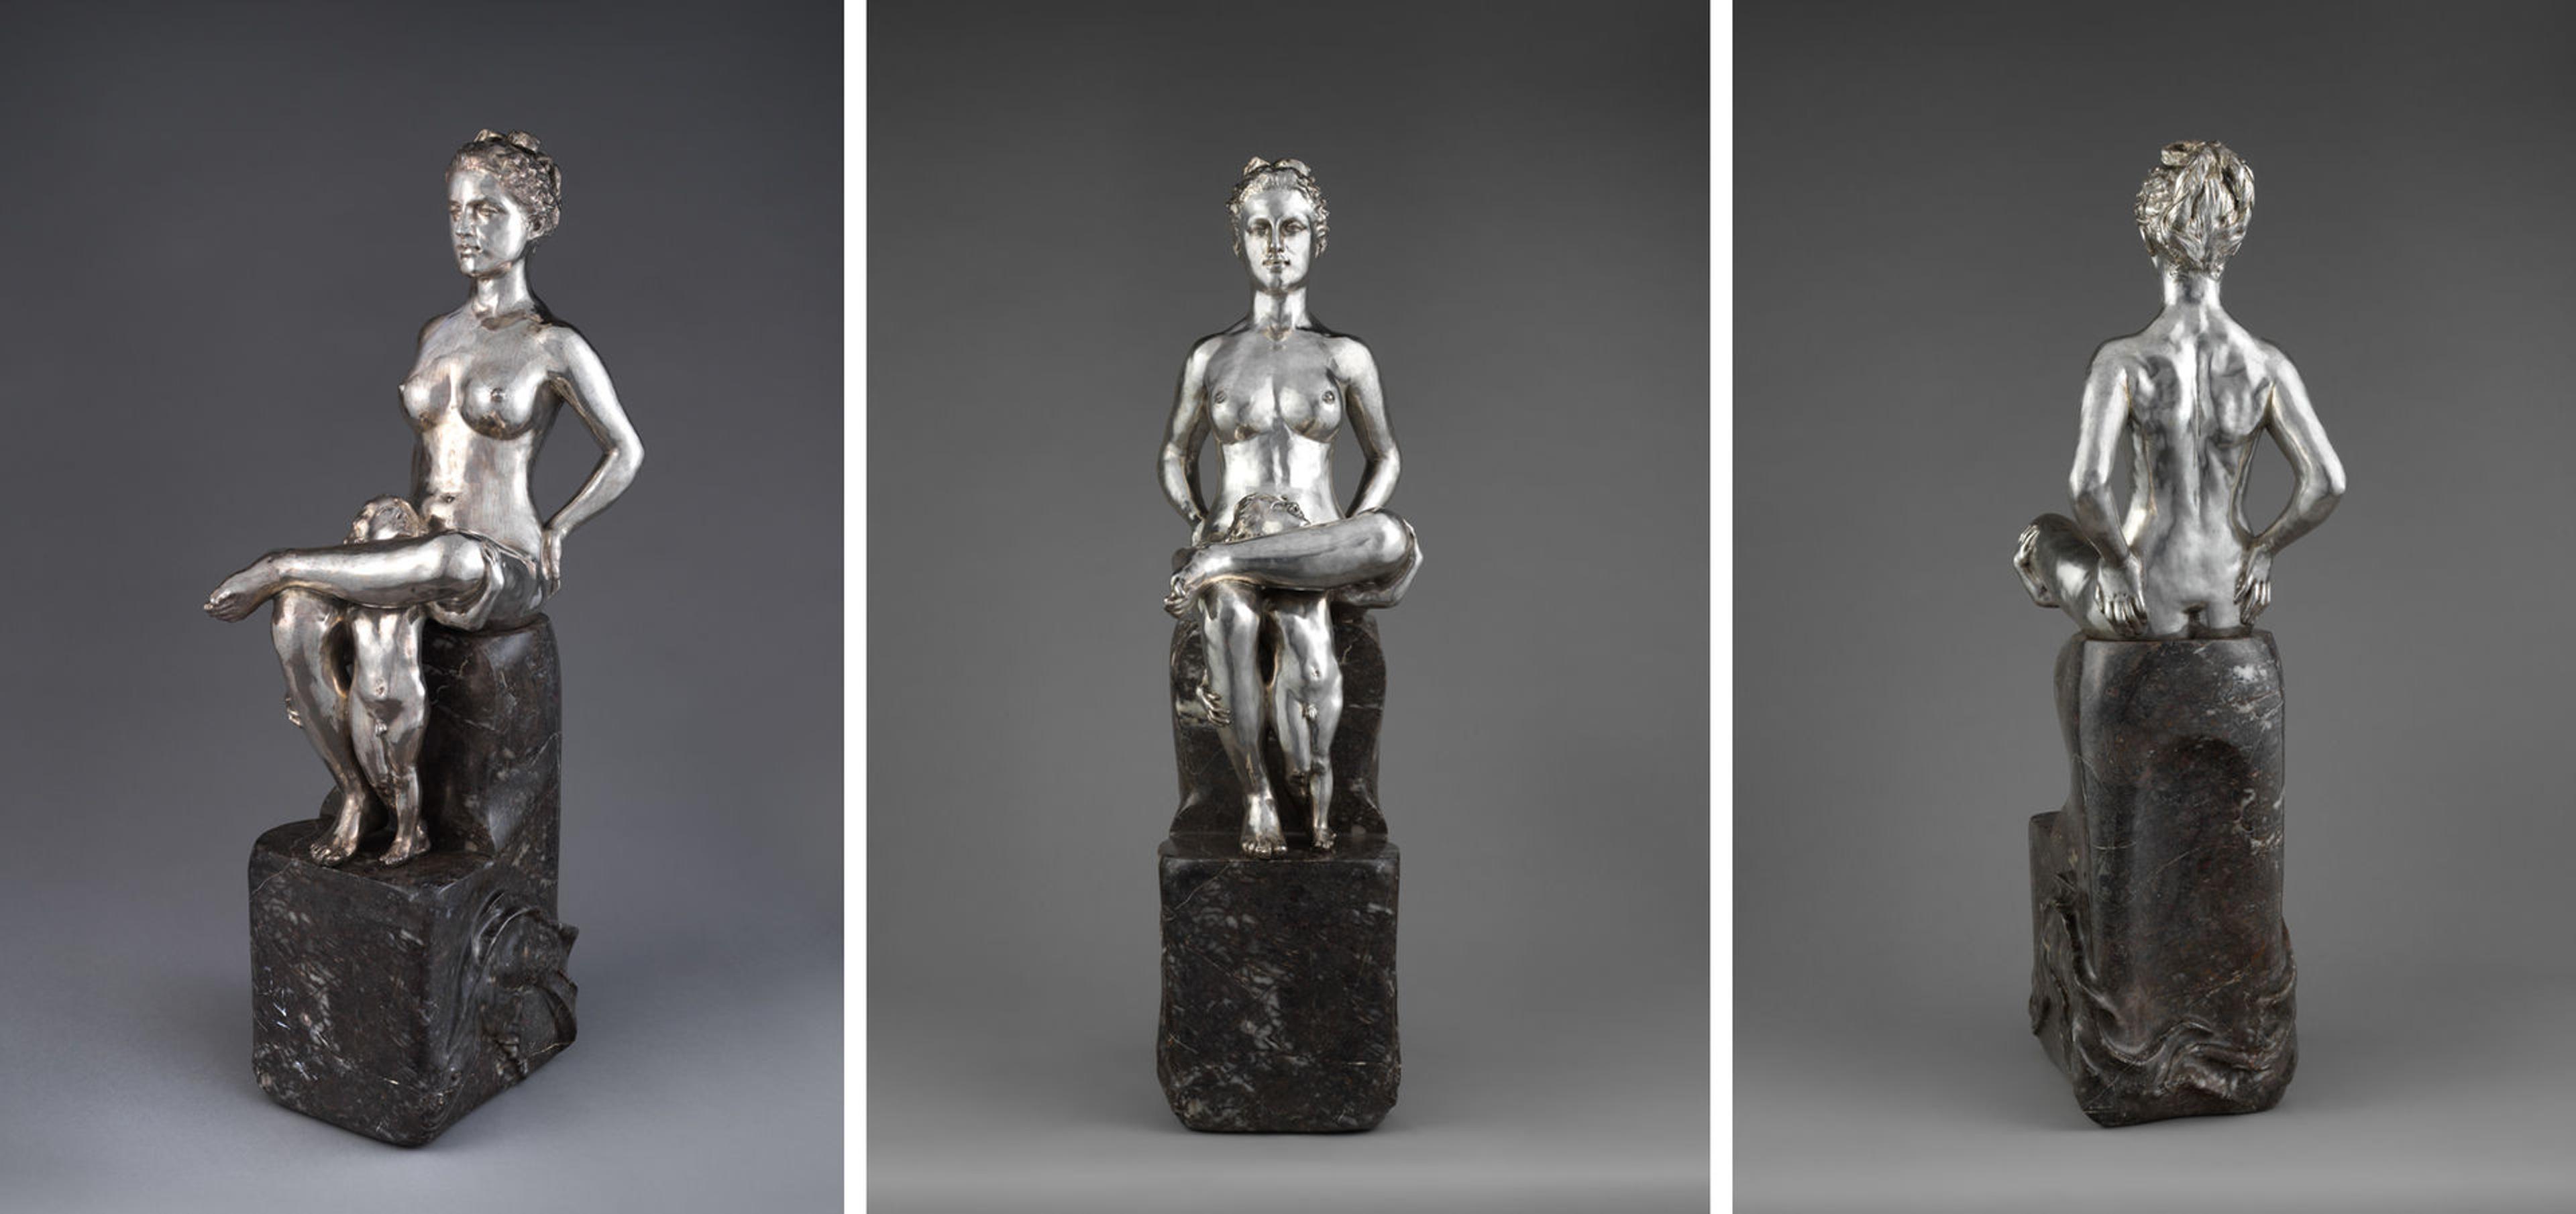 Three views of a silver sculpture by Max Klinger depicting a woman and child atop a marble throne